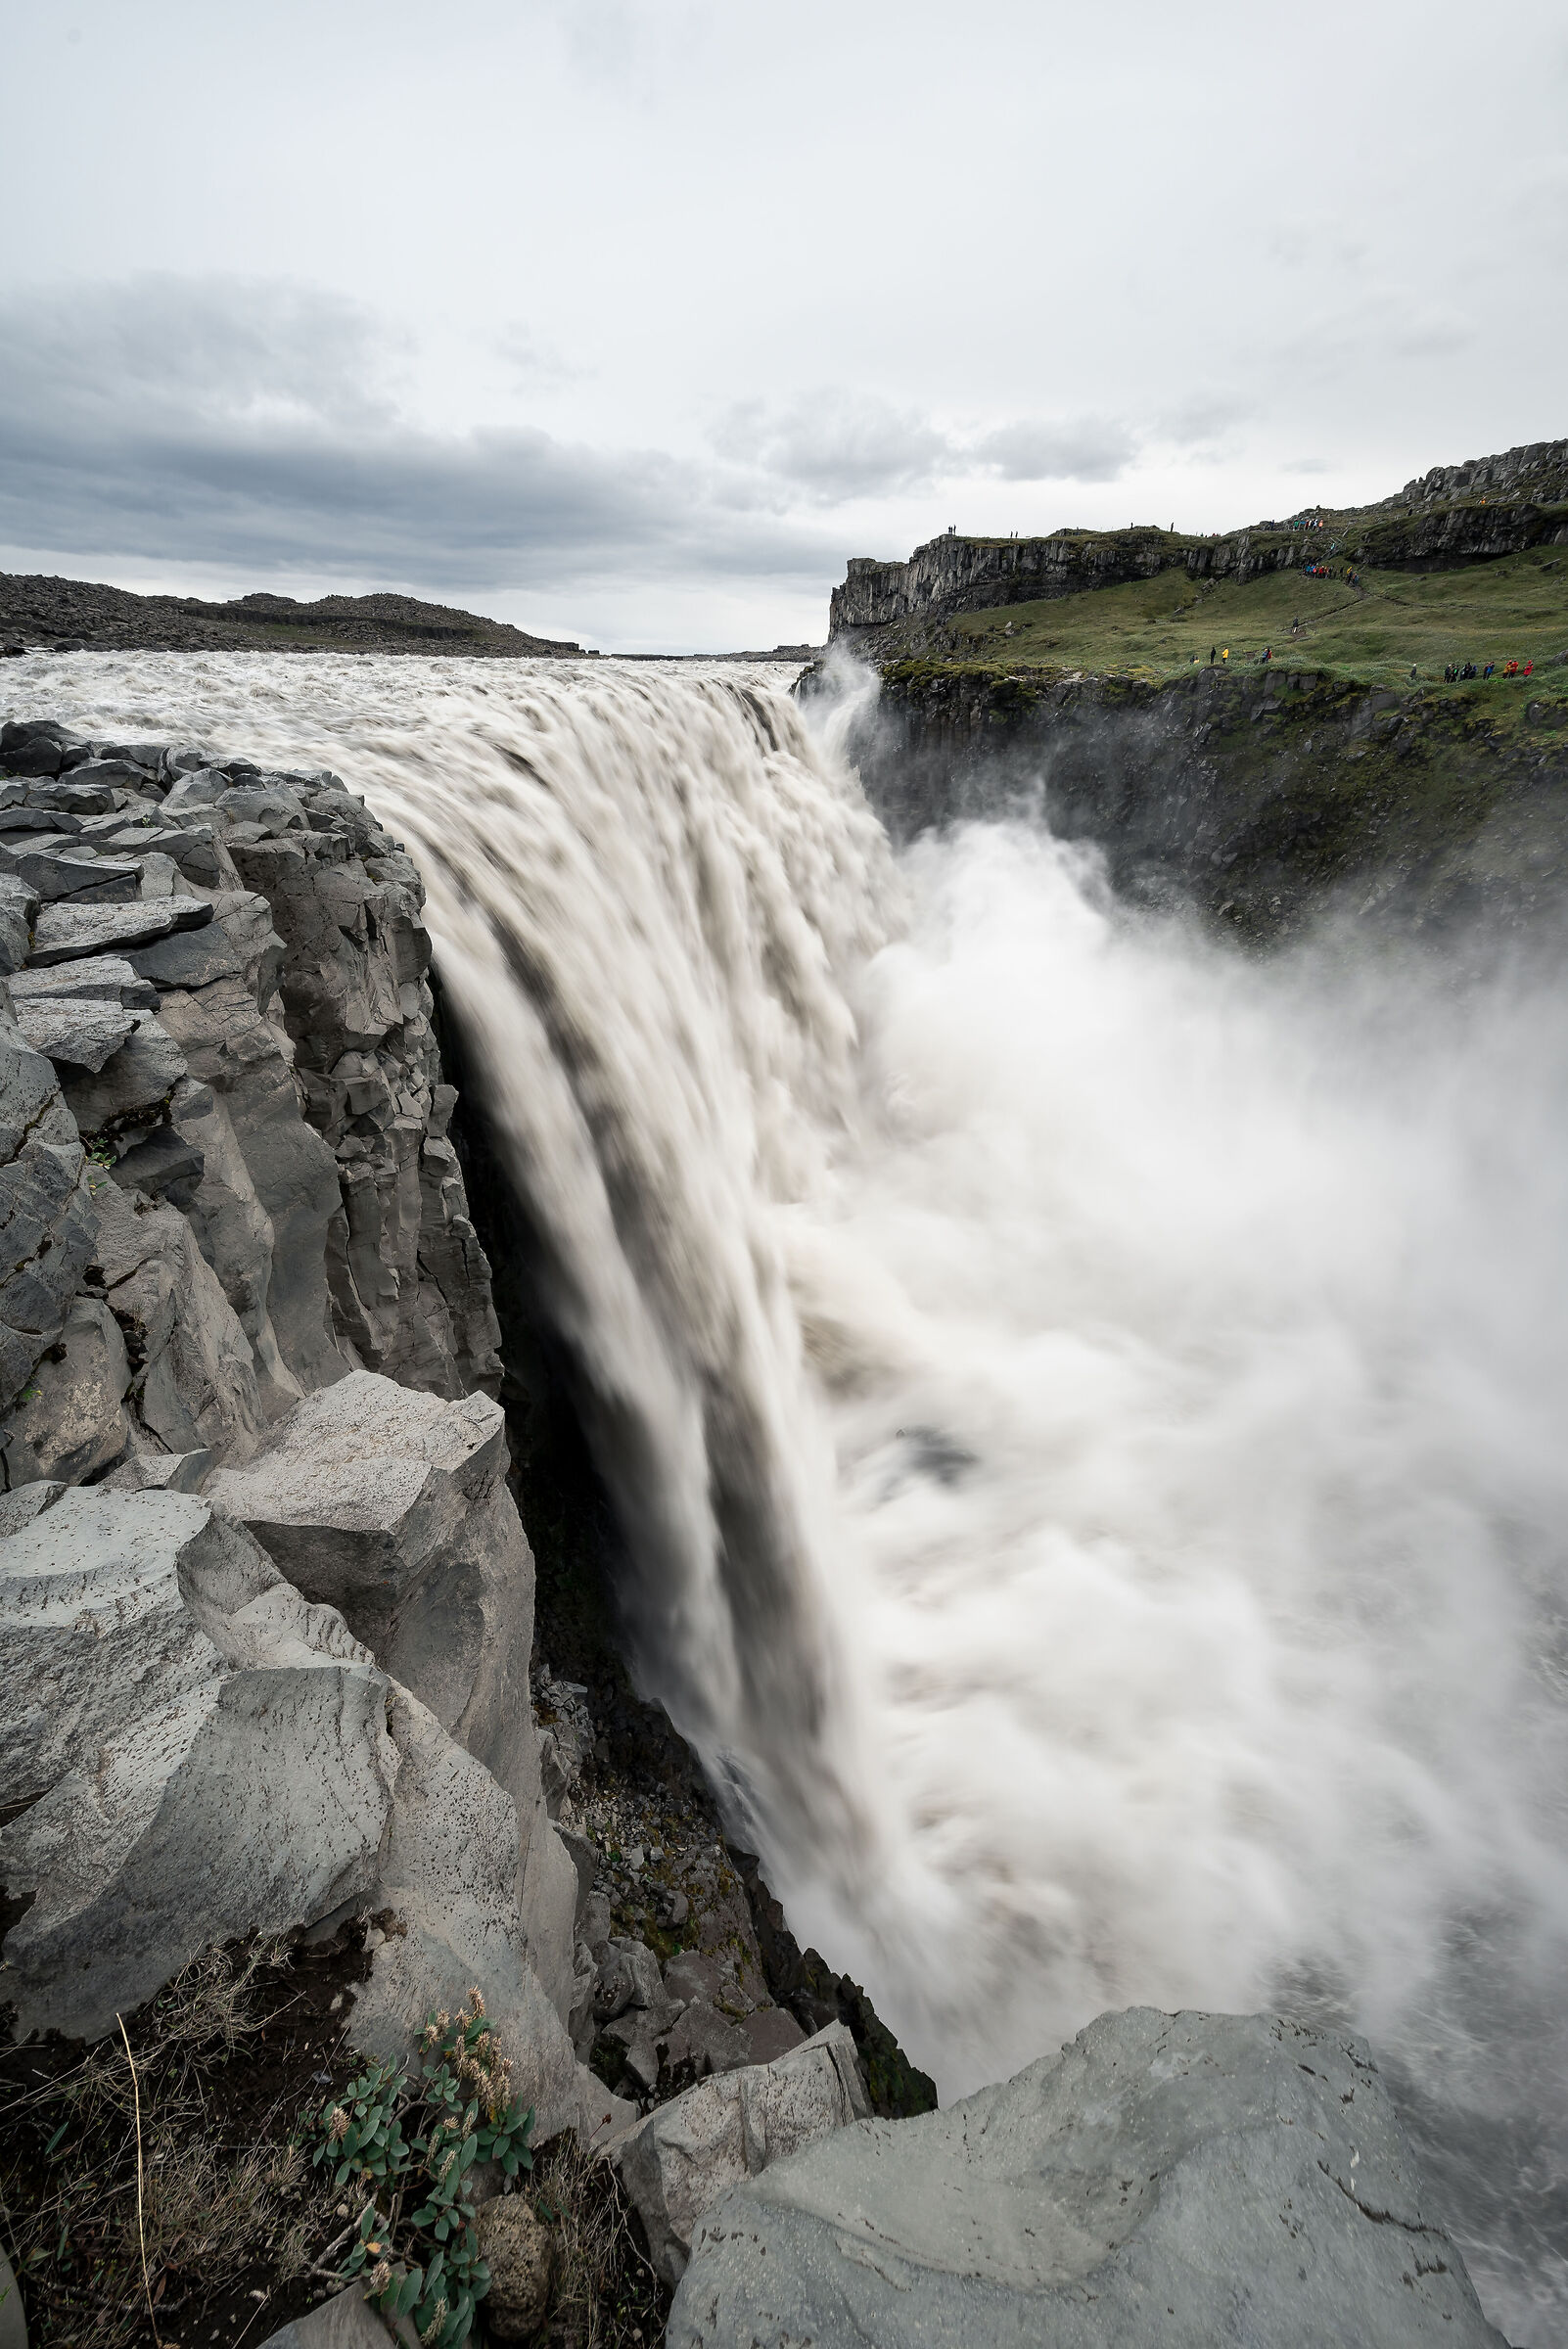 Dettifoss, the most immense of the waterfalls...